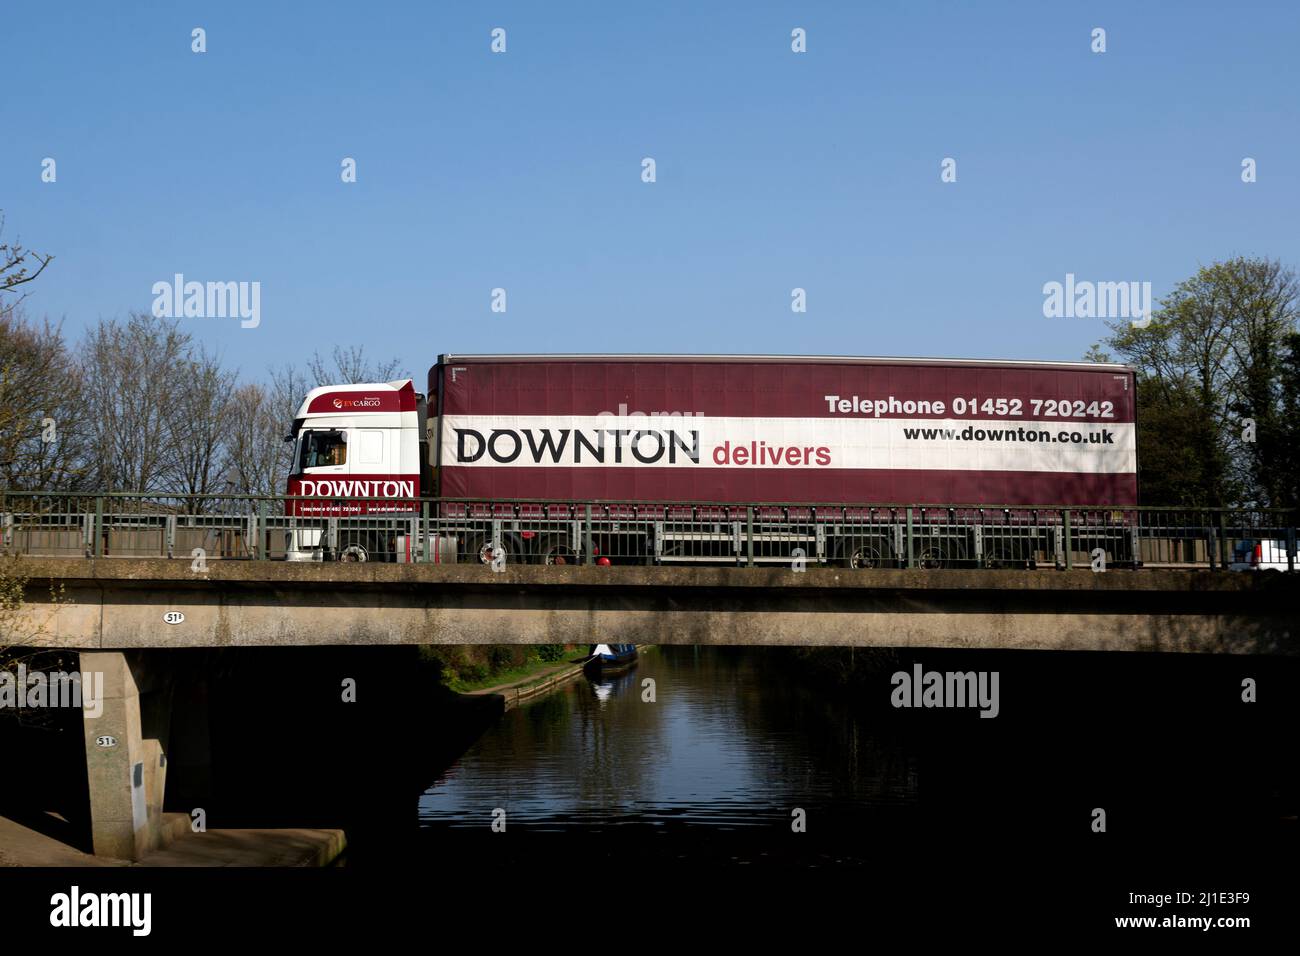 Downton lorry on the A46 road passing over the Grand Union Canal, Warwick, UK Stock Photo